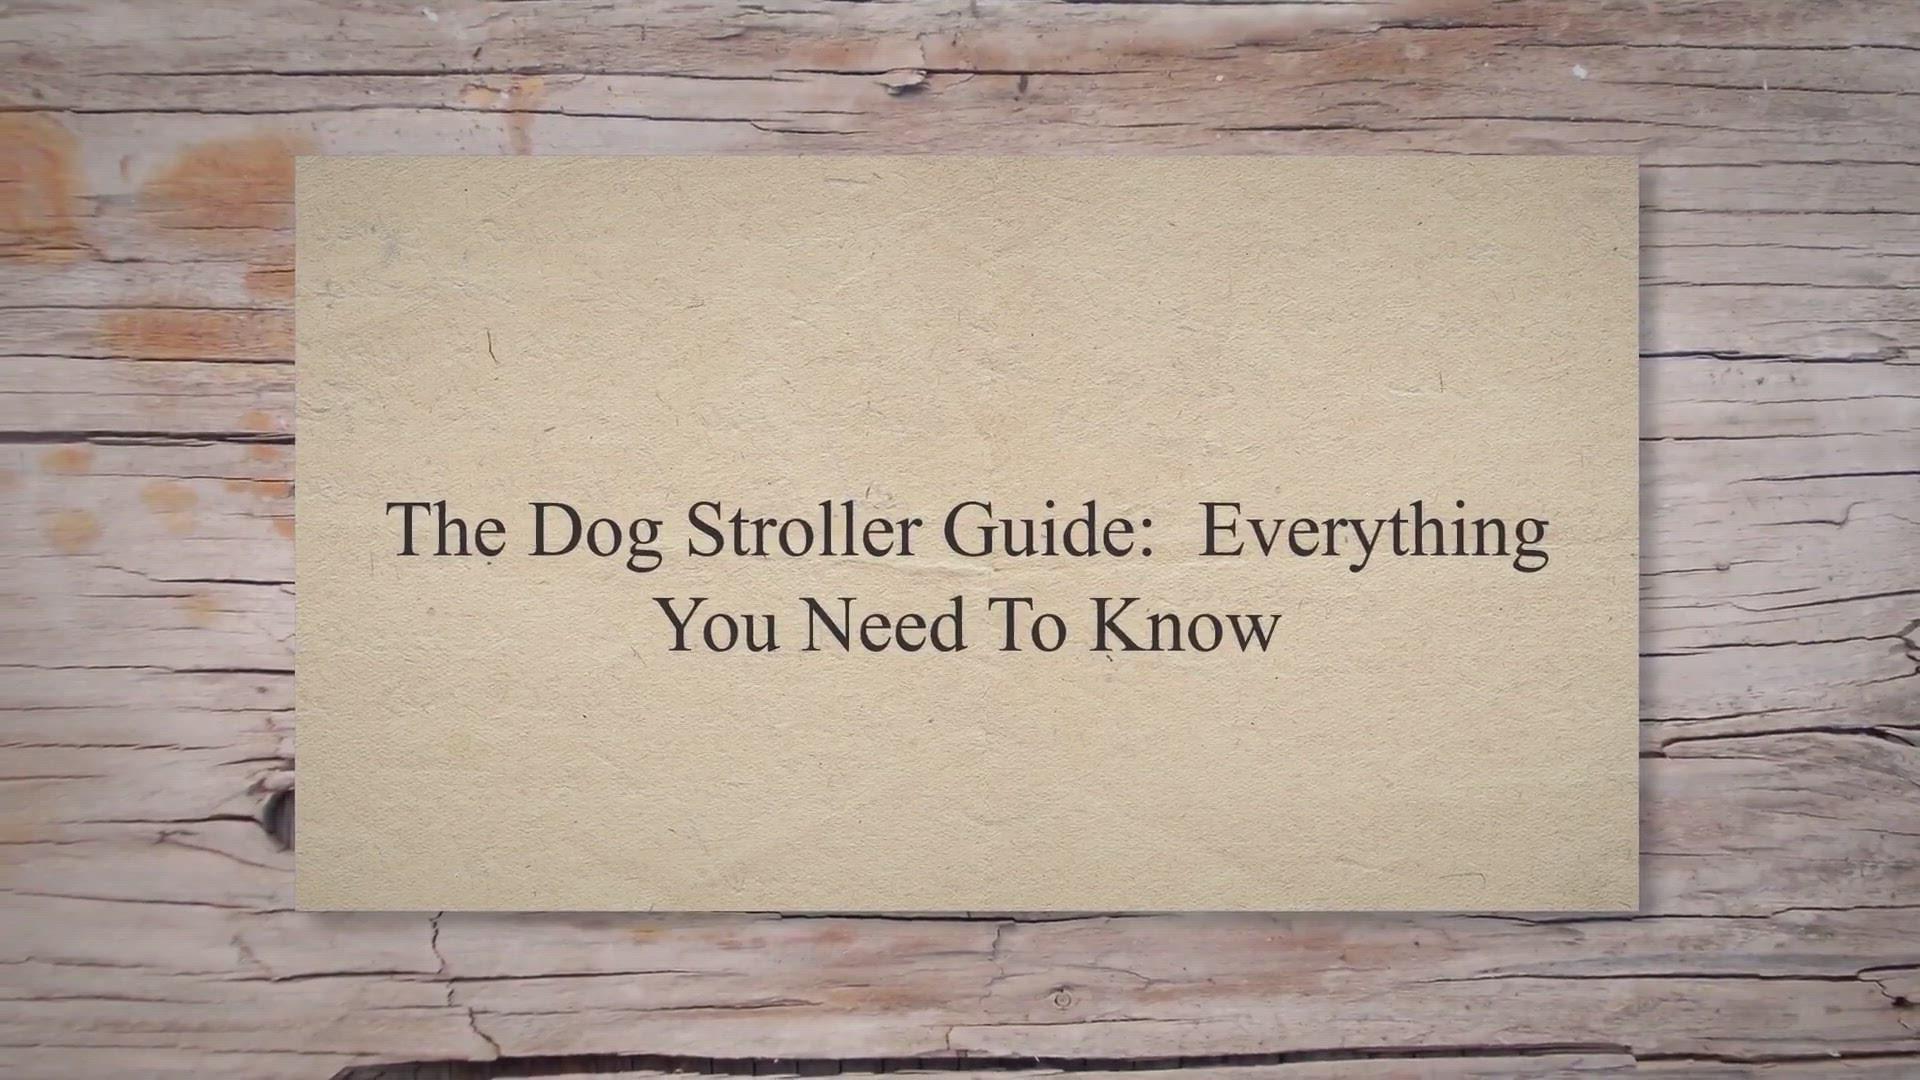 'Video thumbnail for The Dog Stroller Guide: Everything You Need To Know'